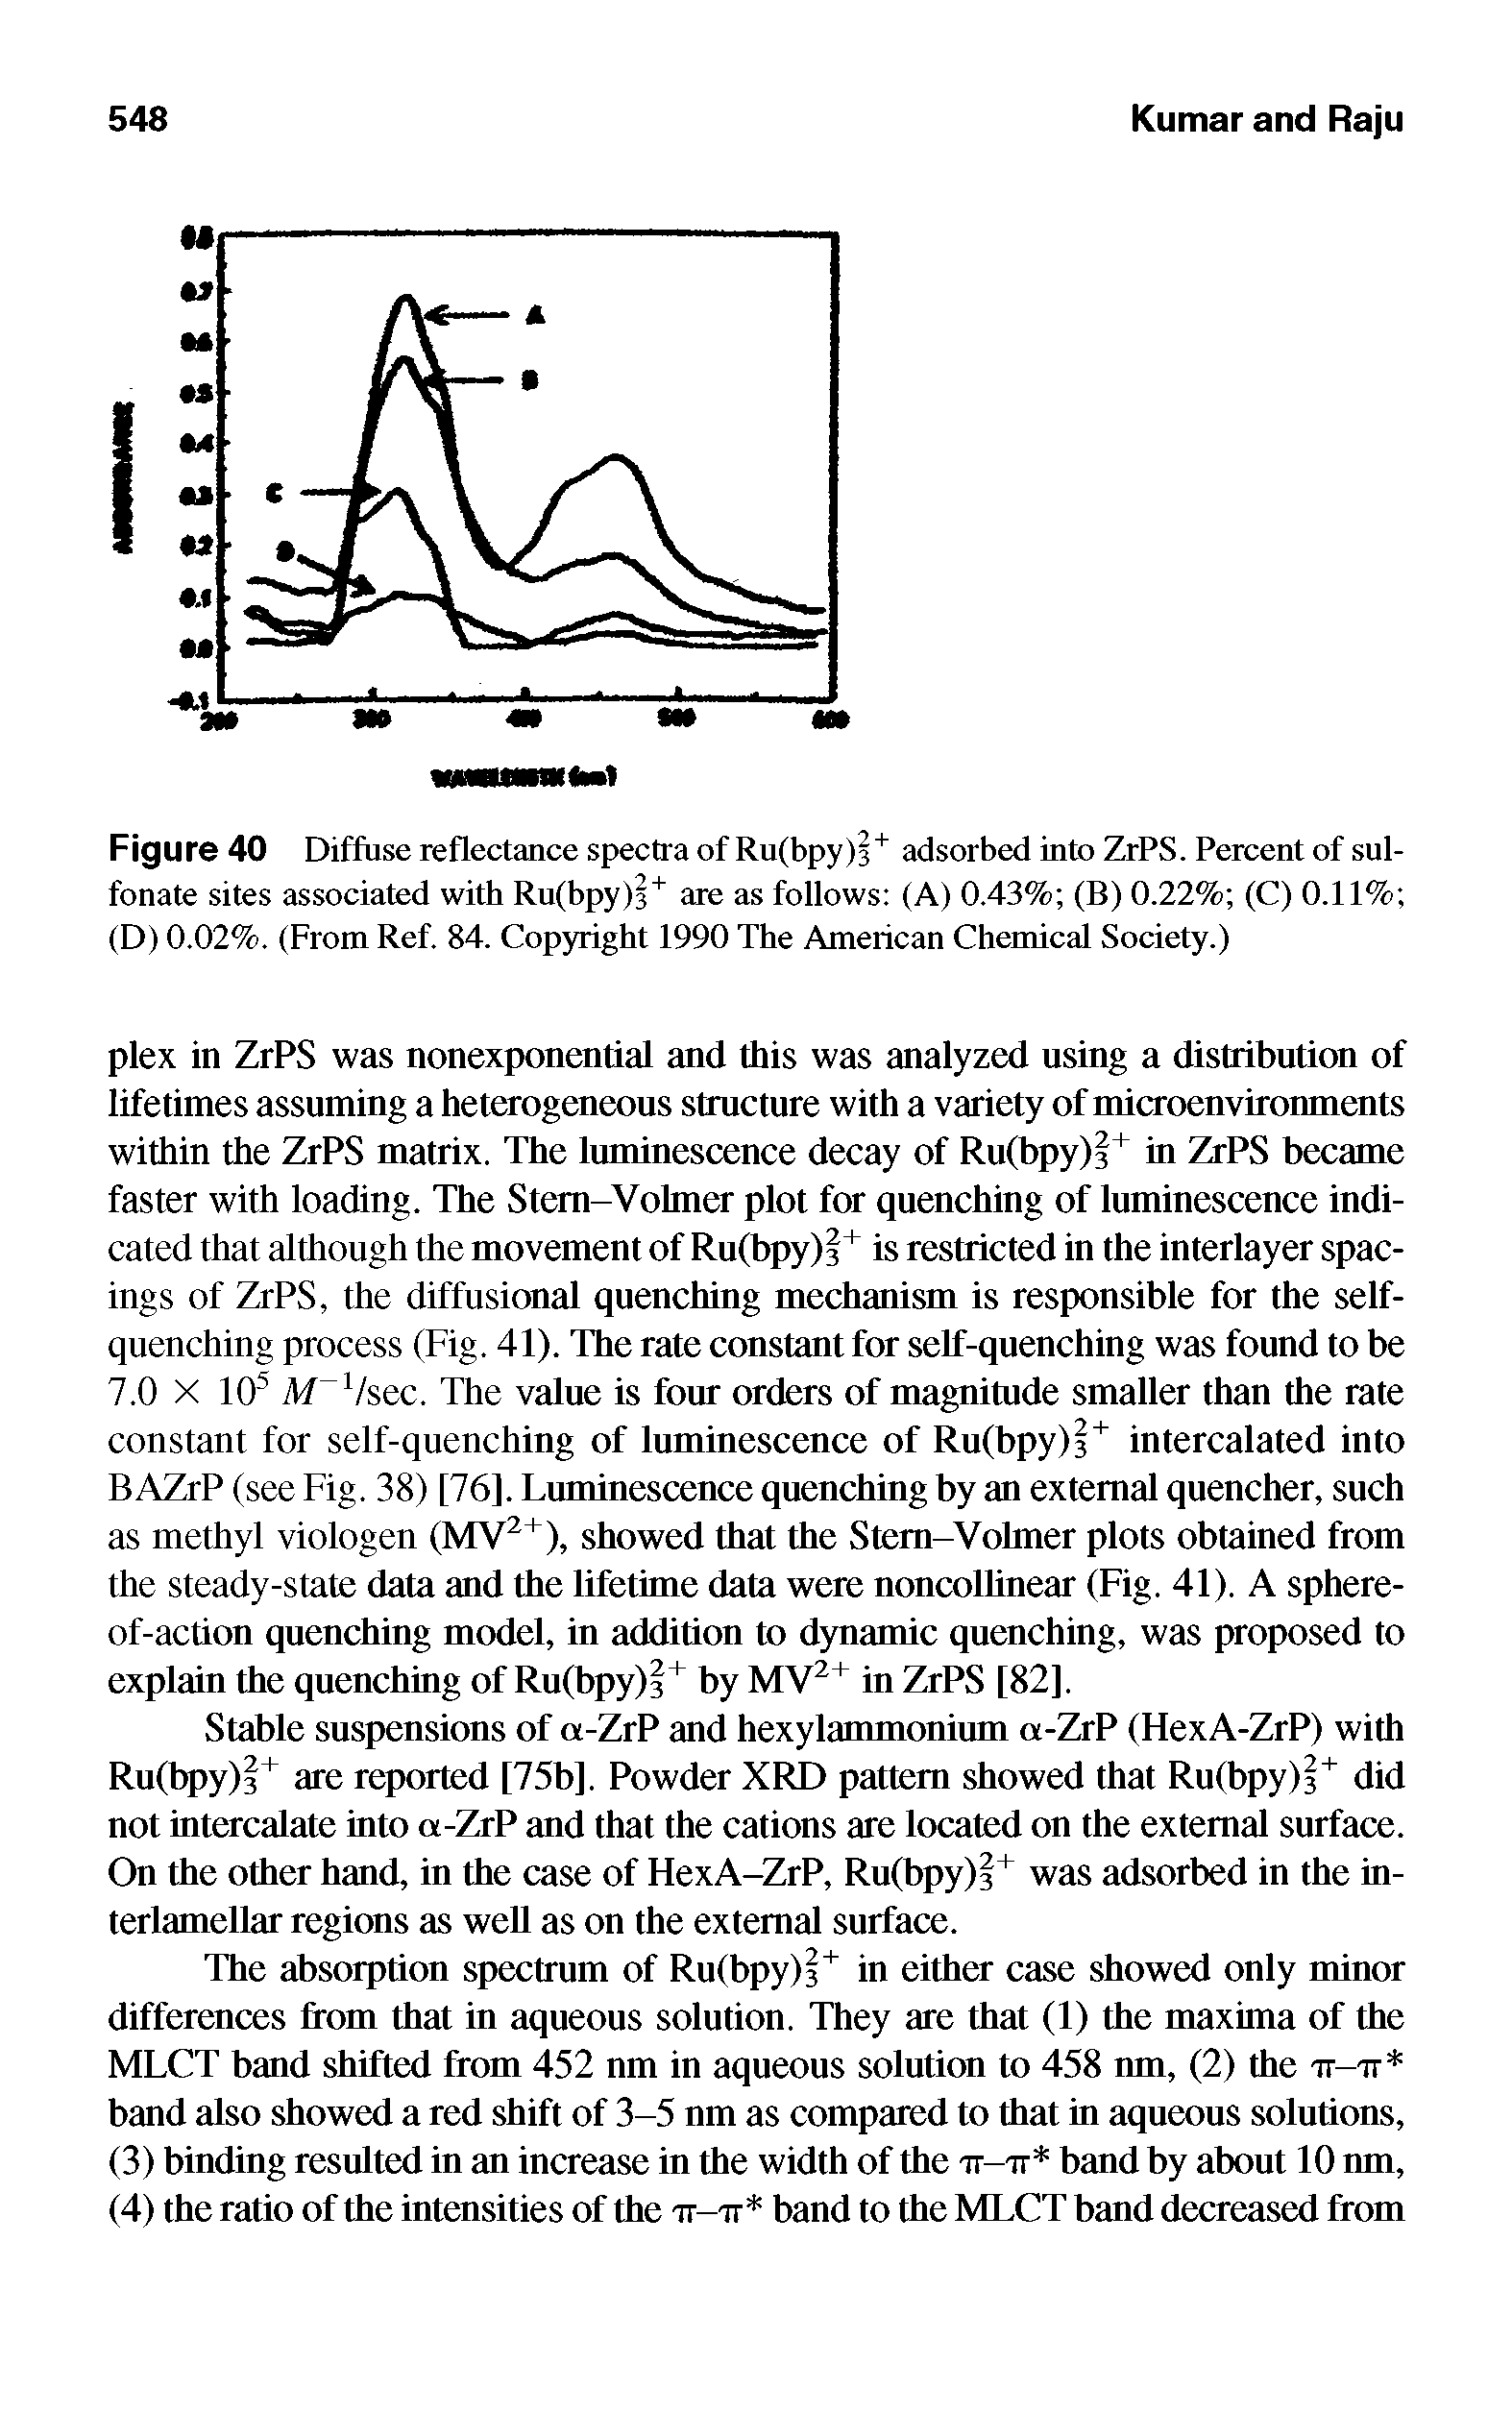 Figure 40 Diffuse reflectance spectra of Ru(bpy) + adsorbed into ZrPS. Percent of sulfonate sites associated with Ru(bpy) + are as follows (A) 0.43% (B) 0.22% (C) 0.11% (D) 0.02%. (From Ref. 84. Copyright 1990 The American Chemical Society.)...